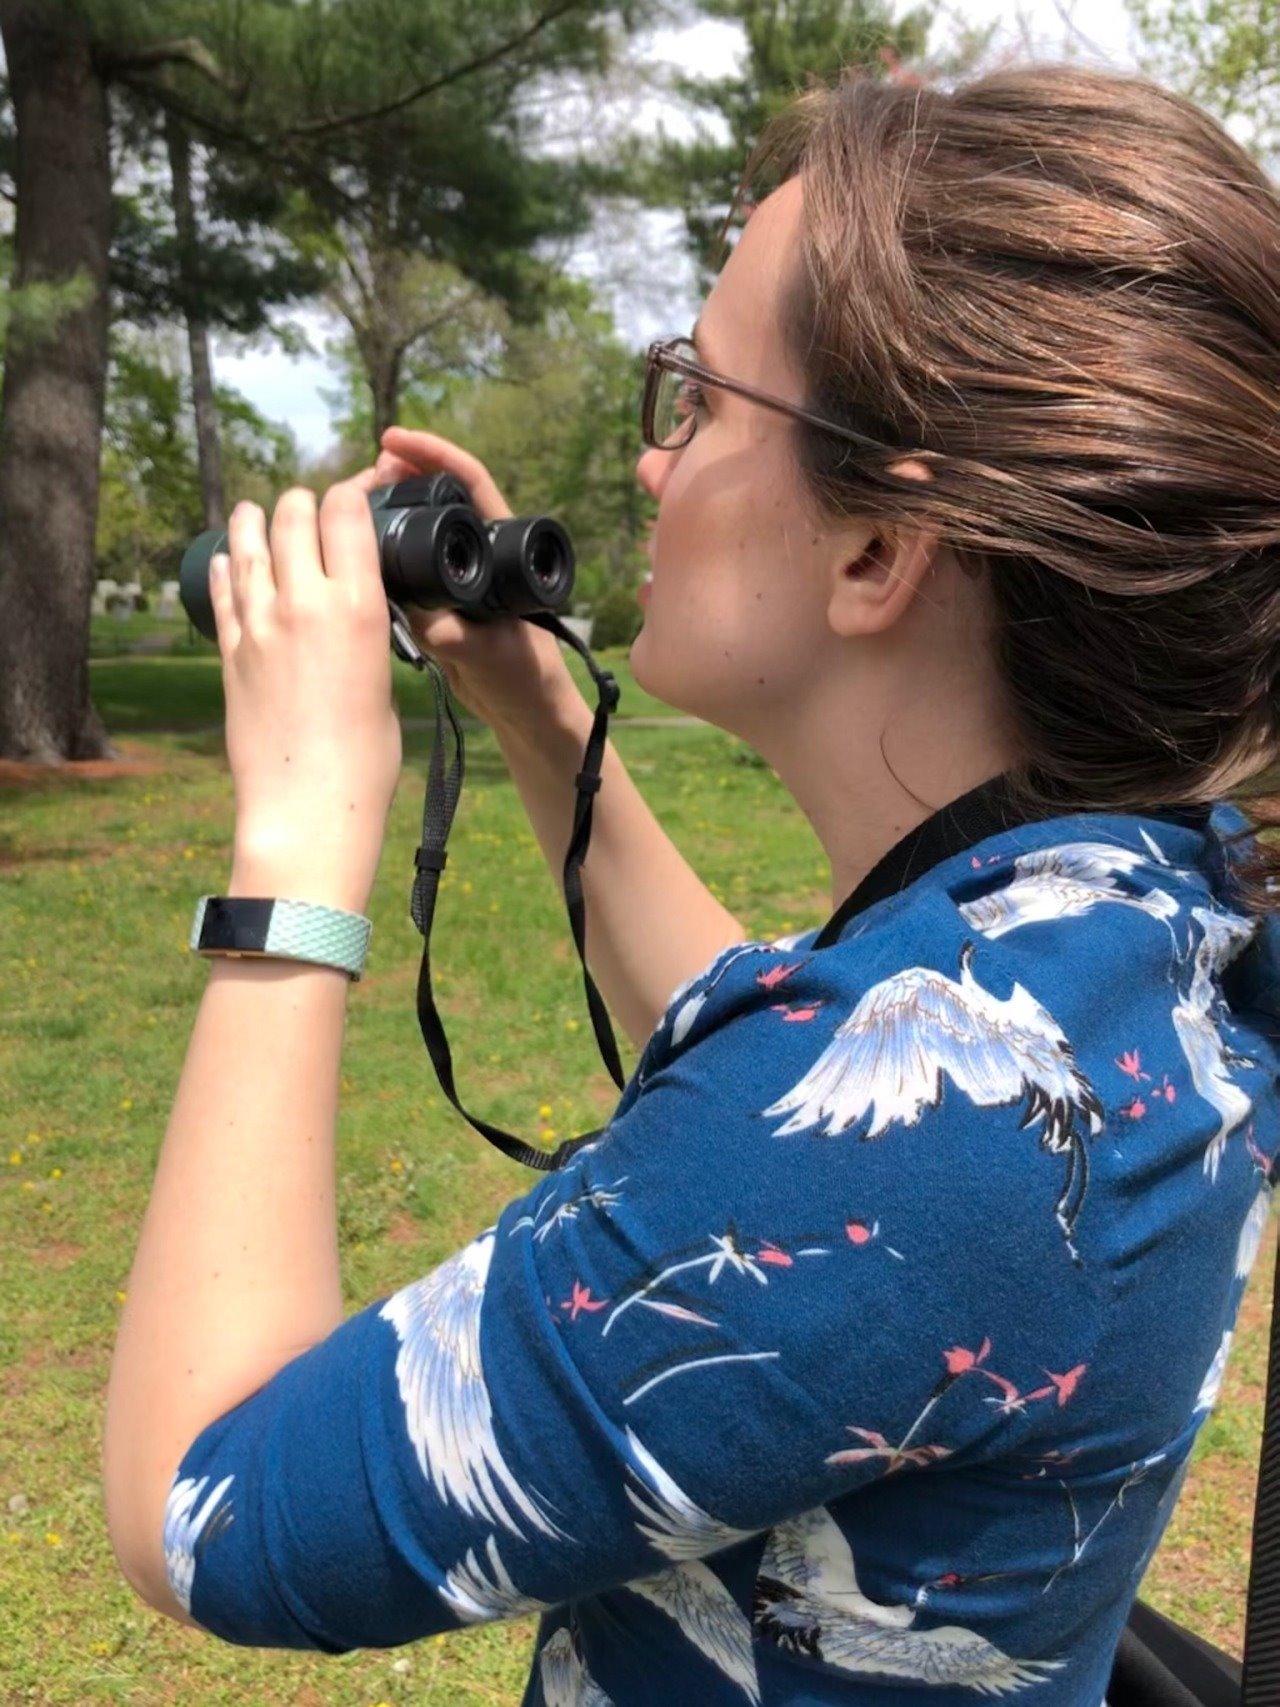 Rebecca Doris, wearing a blue dress with a print of herons, looking through binoculars away from the camera at Mount Auburn Cemetery in Cambridge. There is a pine tree in the background.